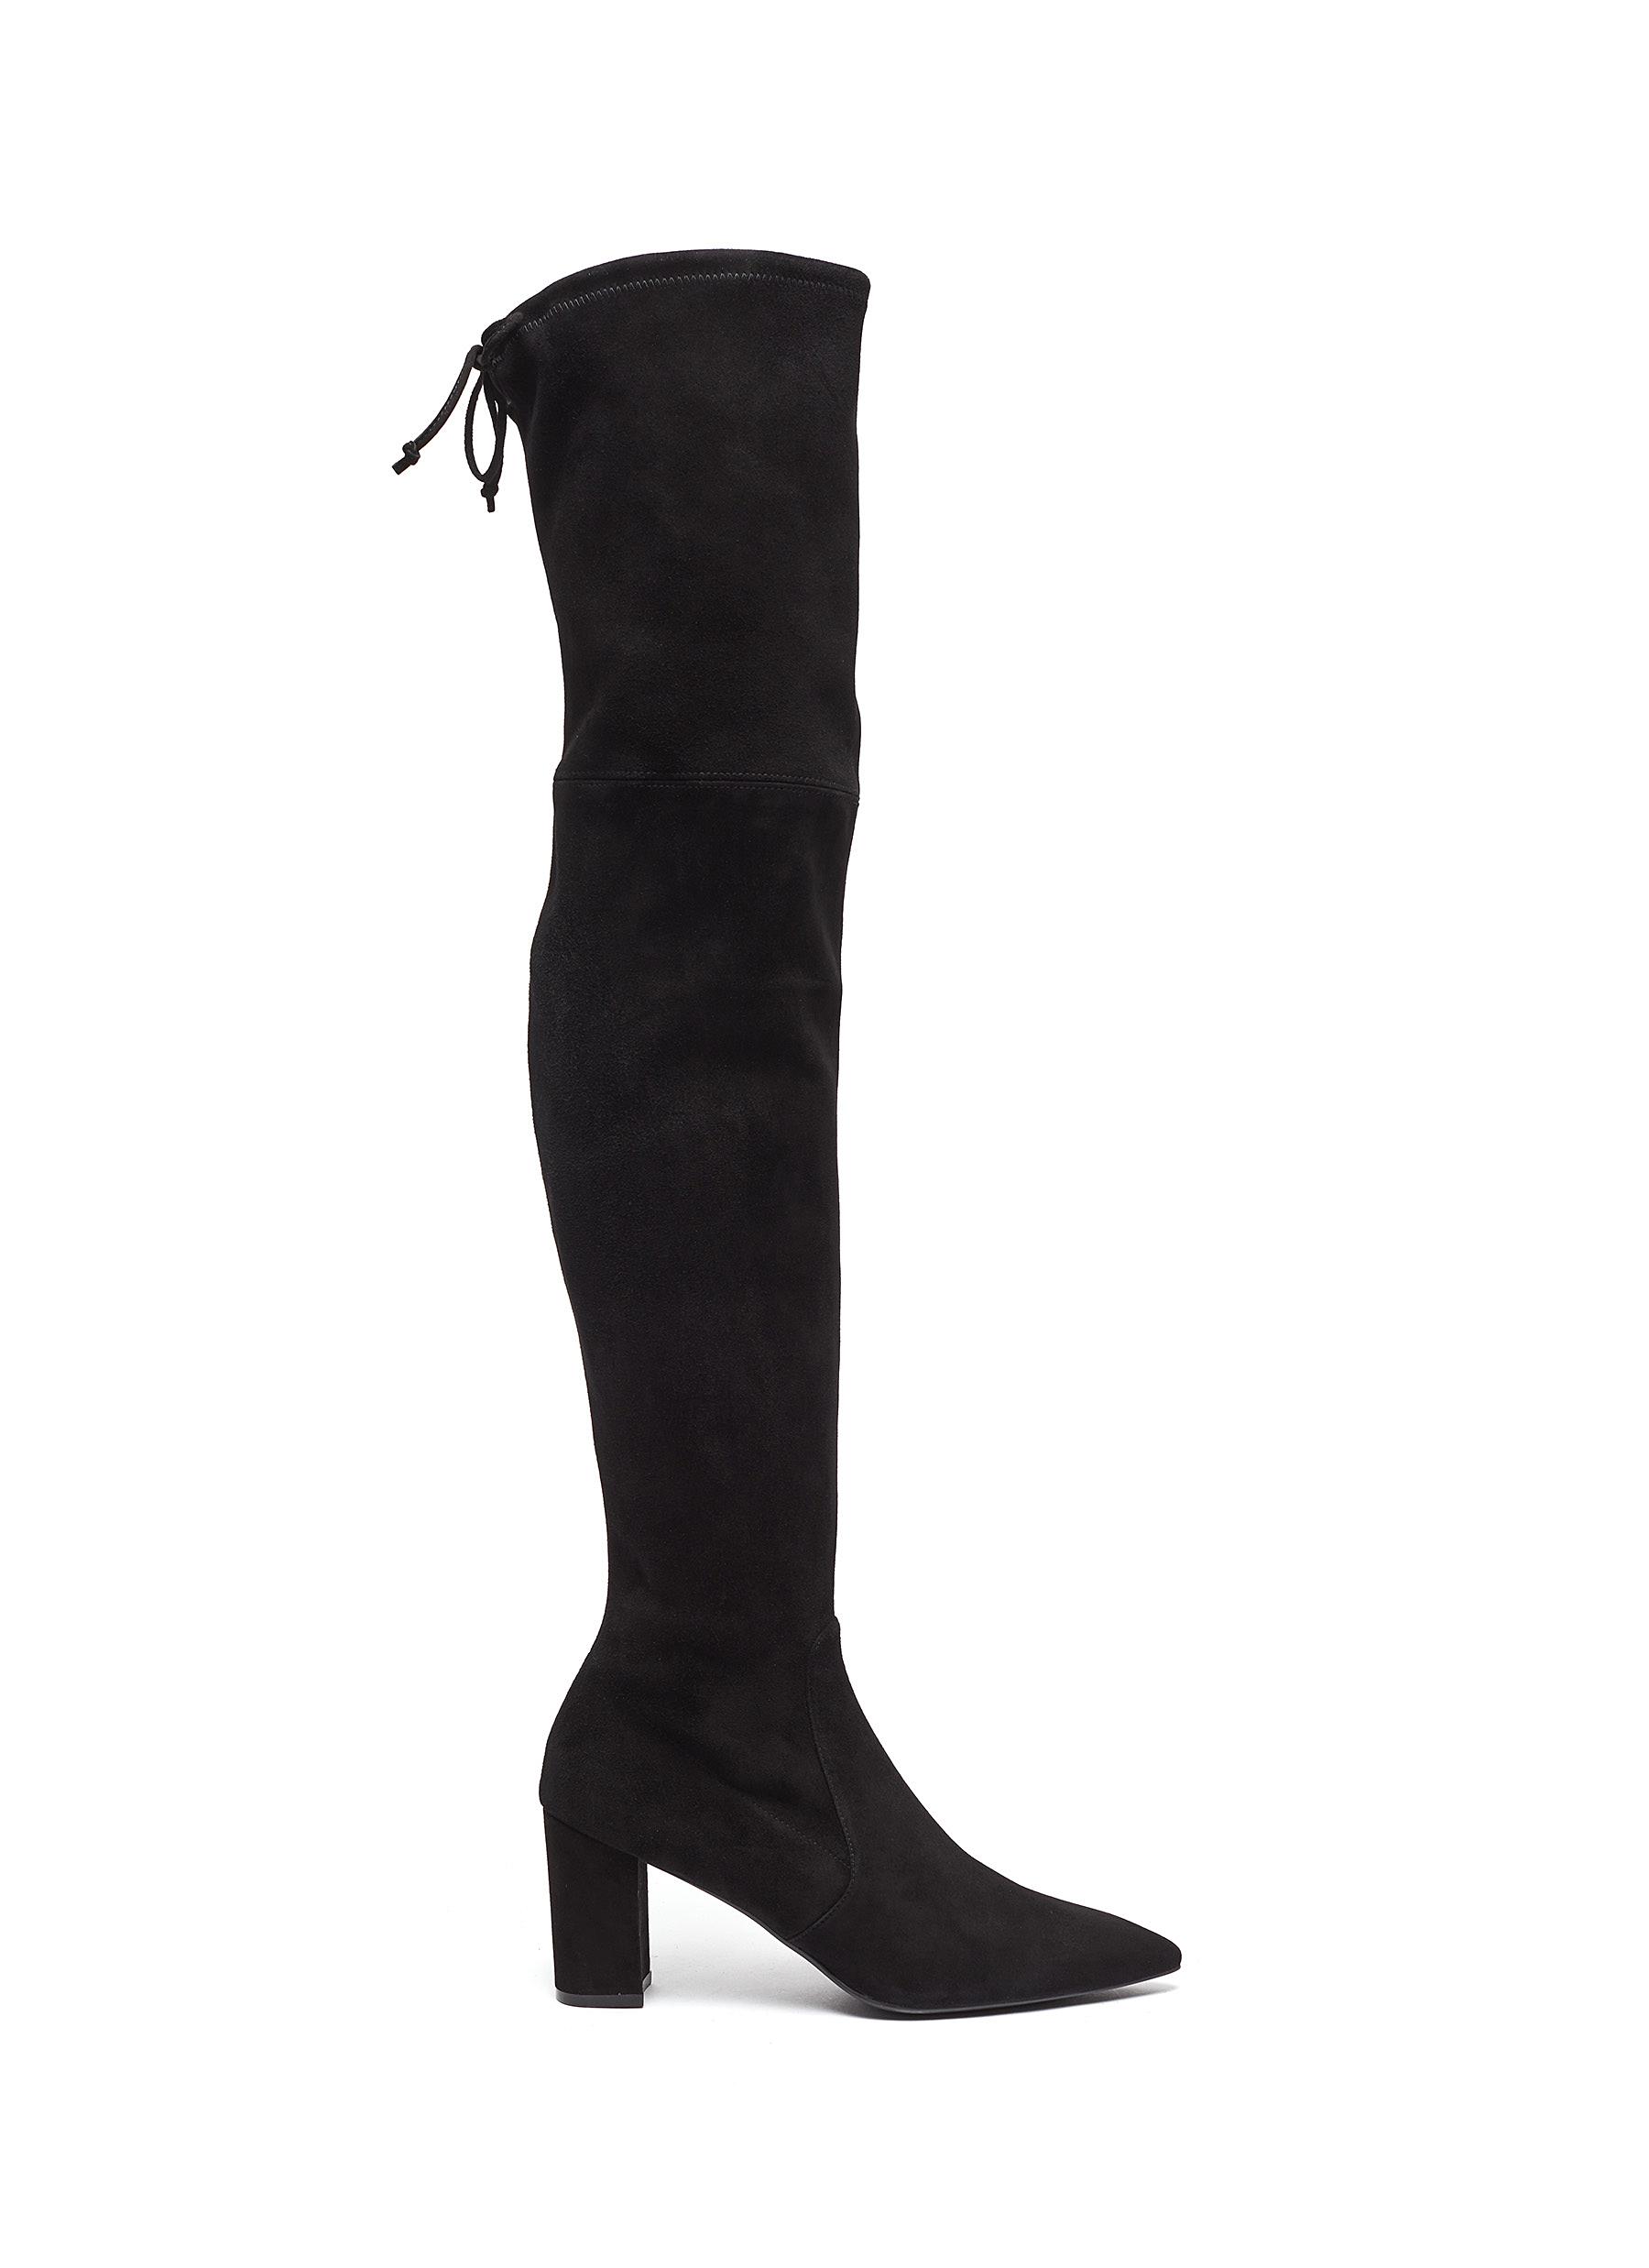 high black lace up boots